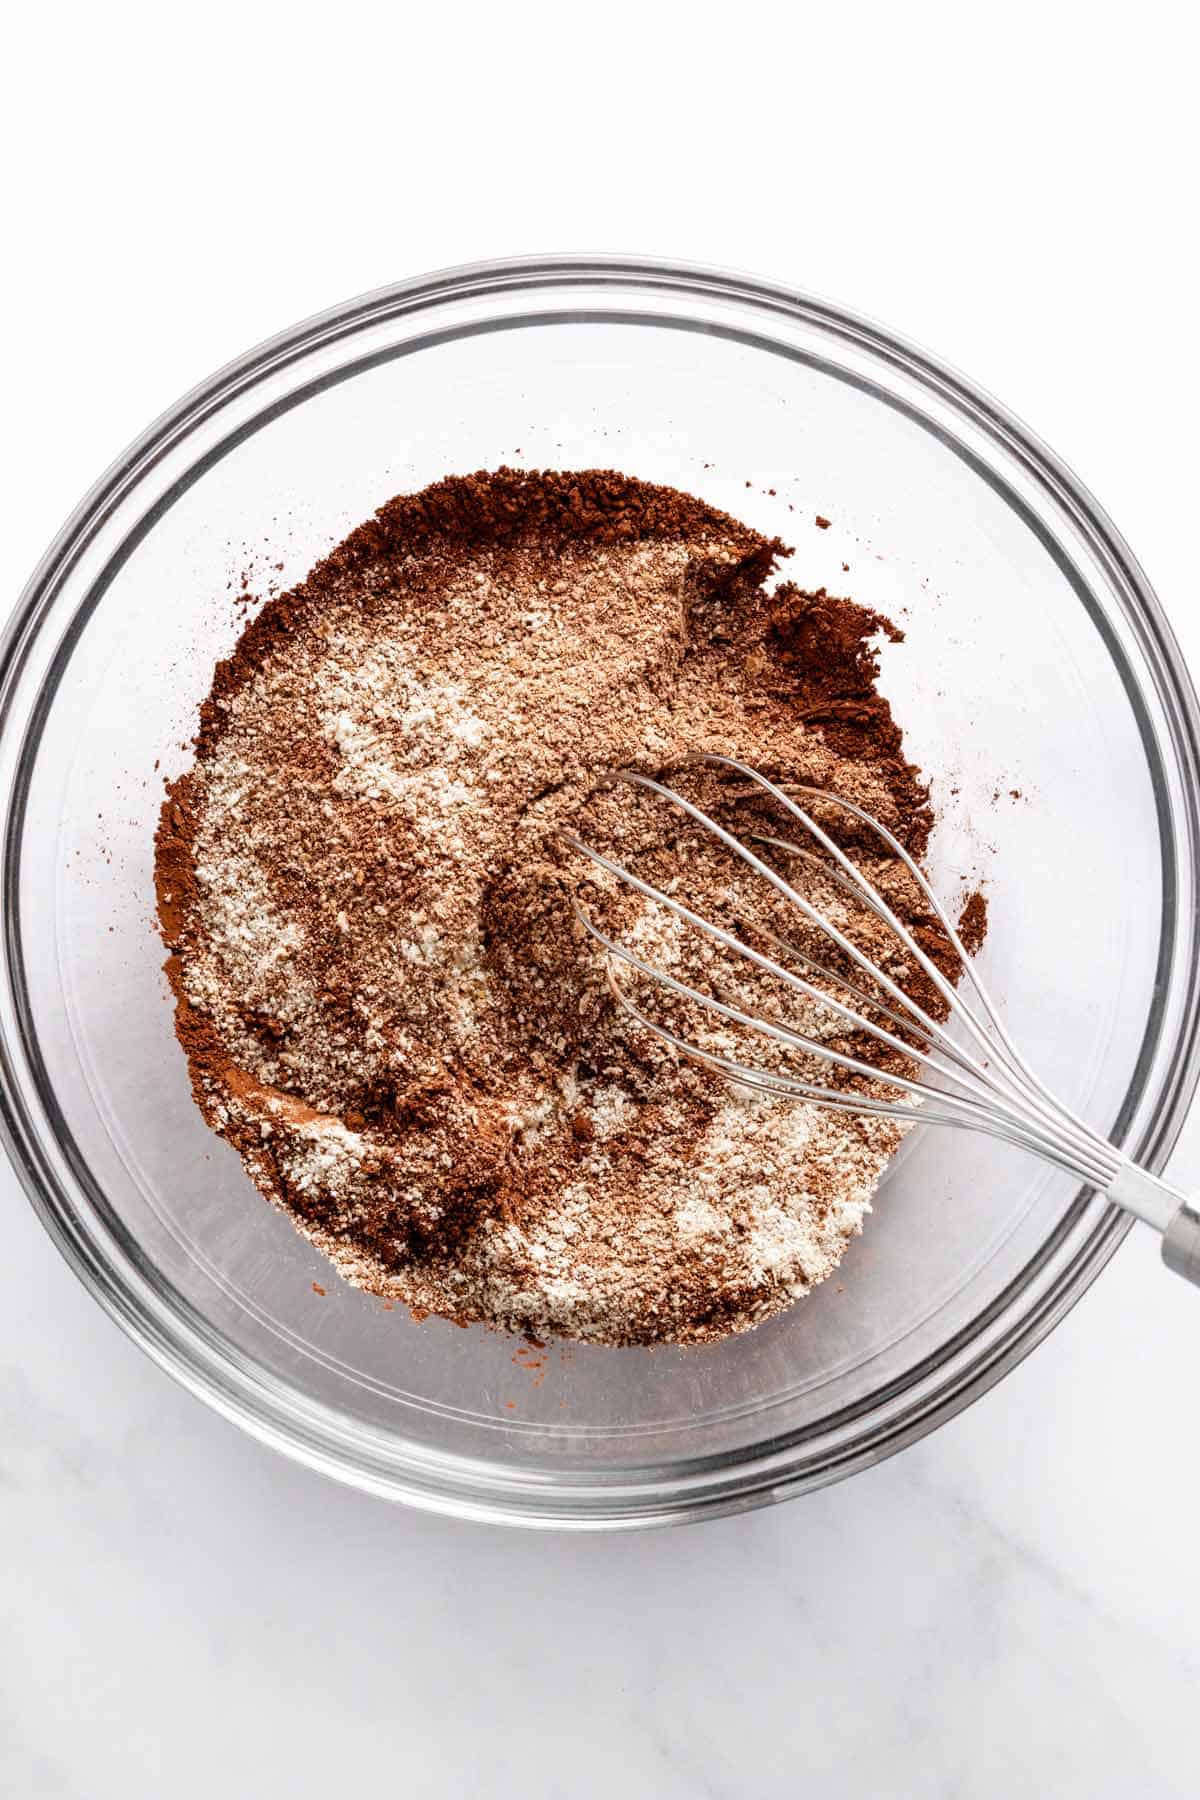 oatflour and cocoa powder in a bowl.